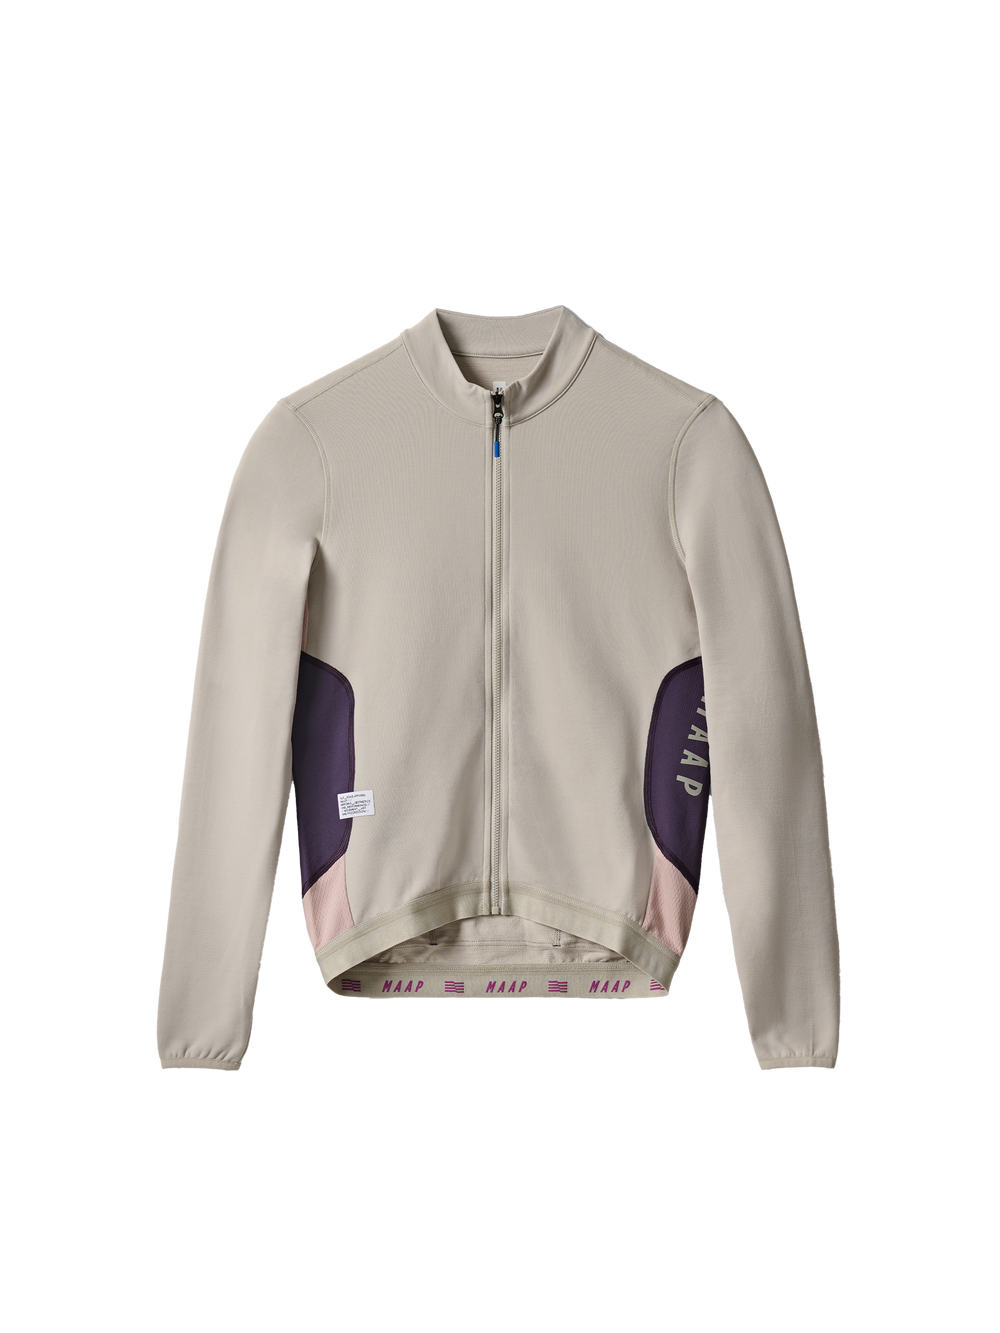 Product Image for Alt_Road LS Jersey